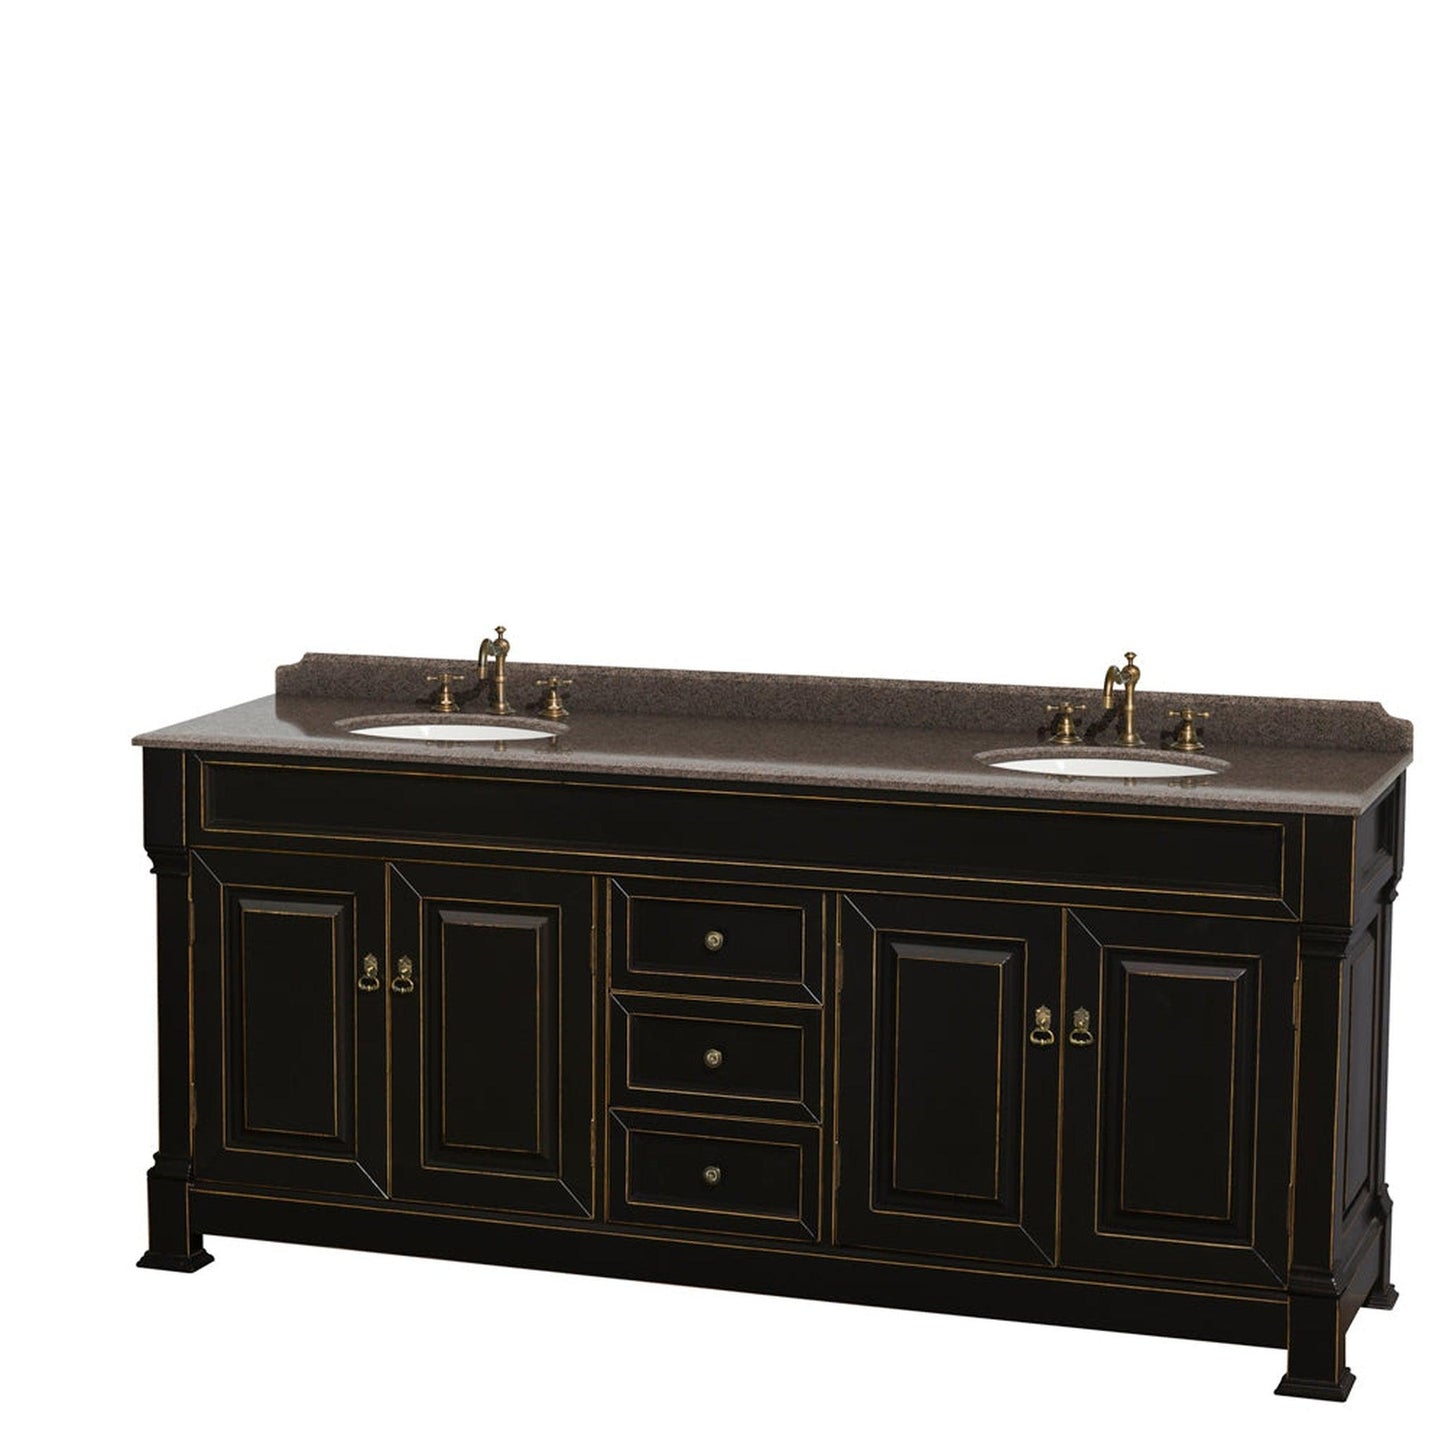 Wyndham Collection Andover 80" Double Bathroom Vanity in Black With Imperial Brown Granite Countertop & Undermount Oval Sink